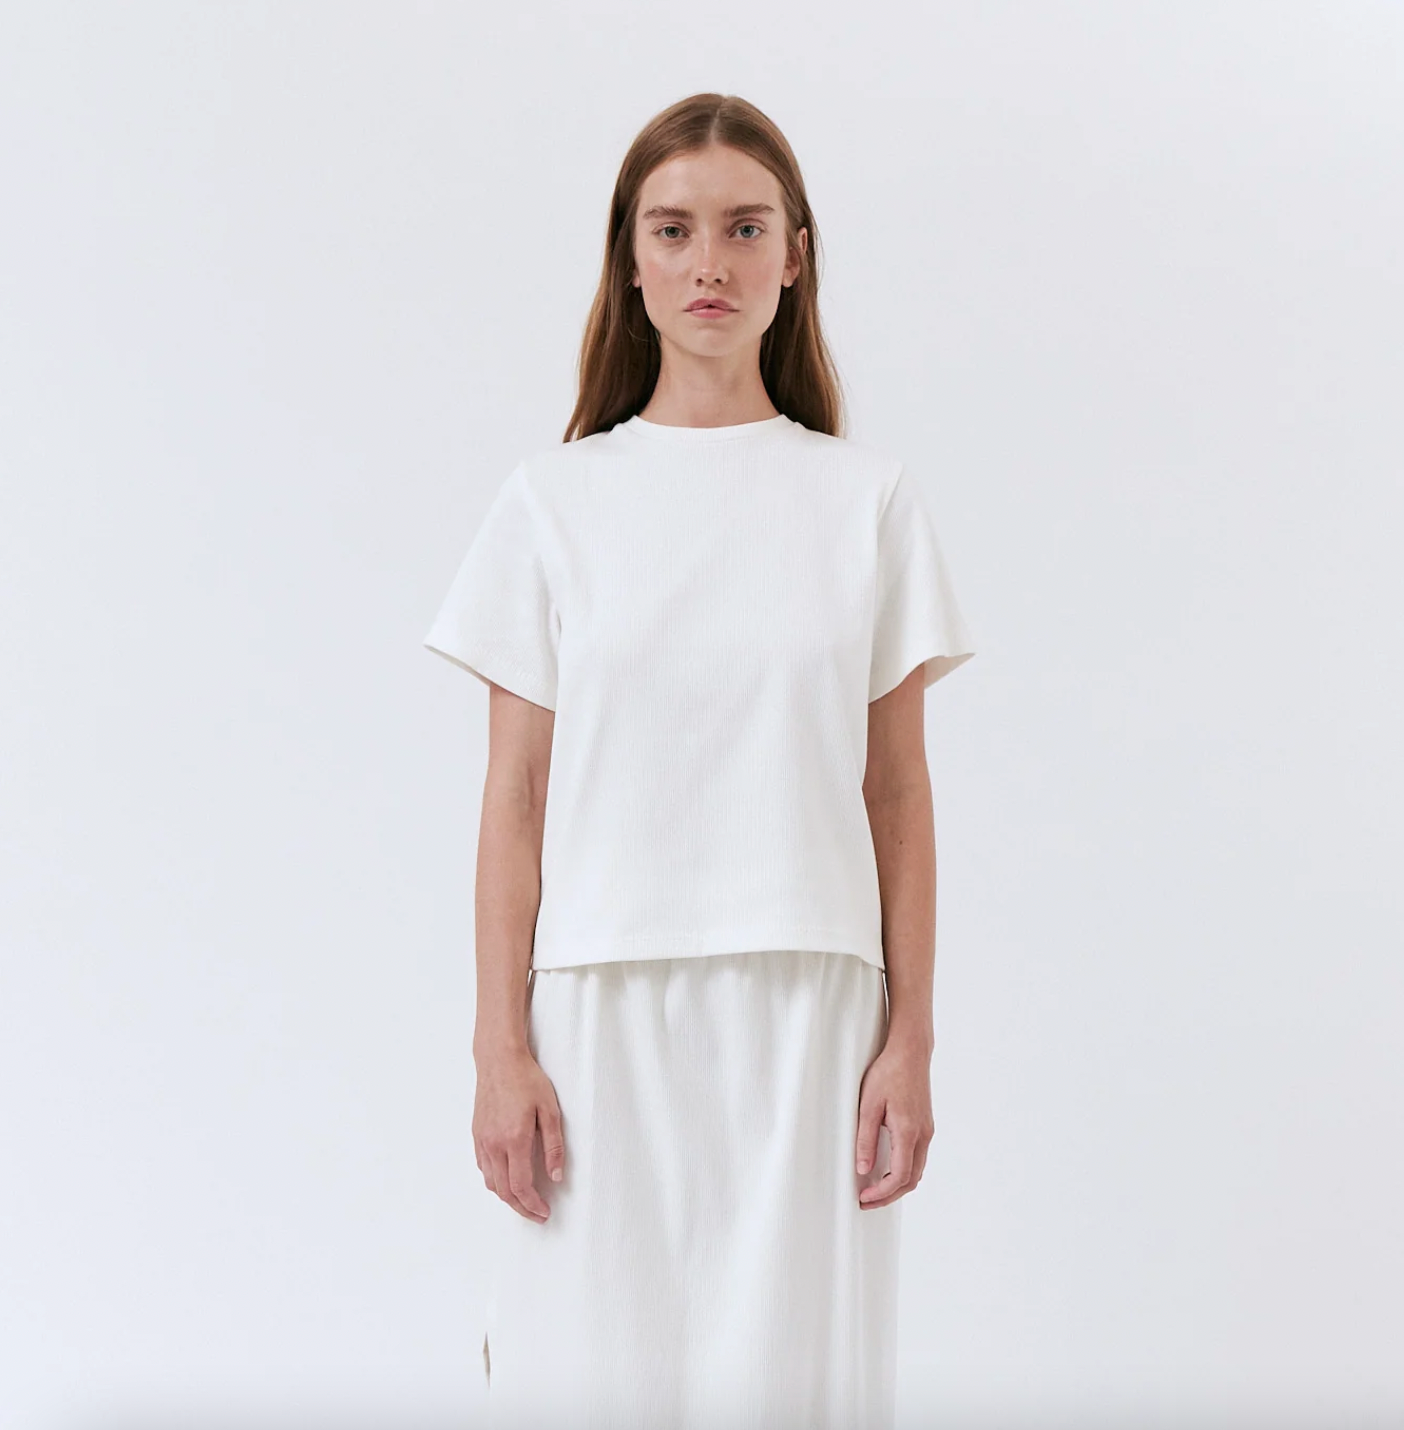 amt. studio Bahia ribknit t-shirt is perfect to use all year long. Not too long, so pairs perfectly with your high waisted pants. 100% organic cotton